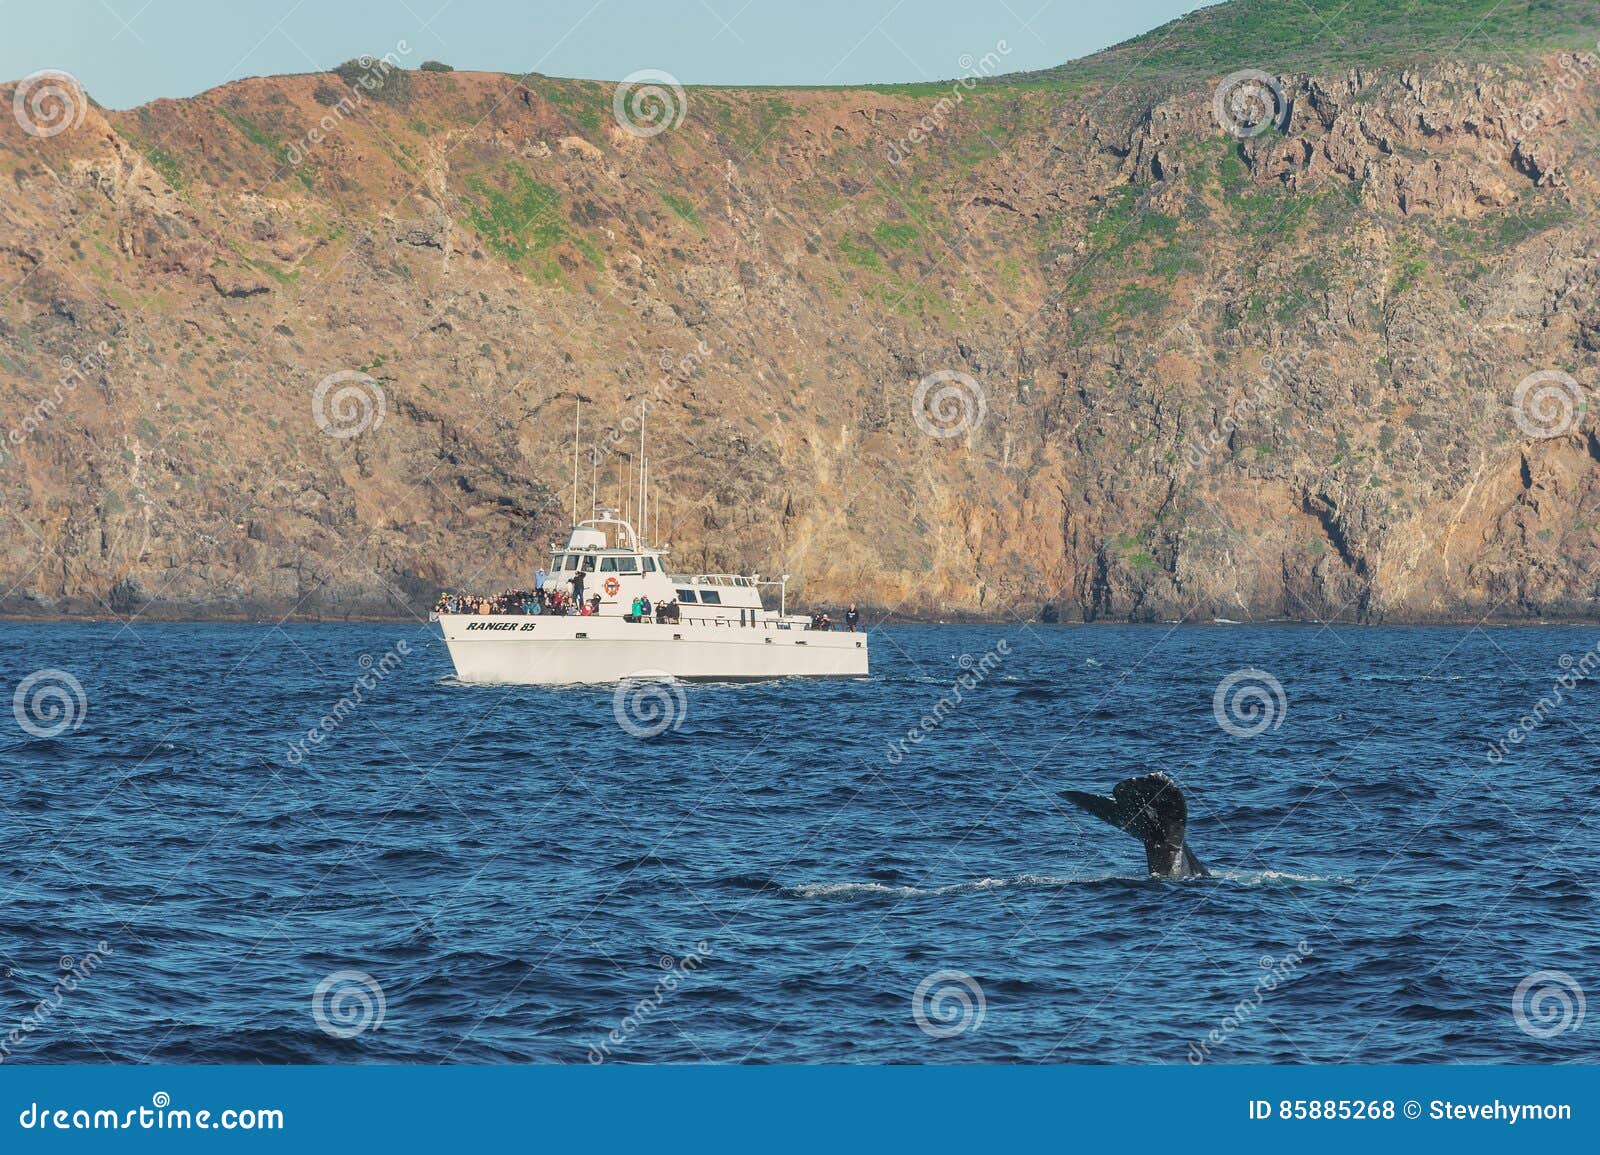 Whale Watching, Channel Islands National Park Editorial Stock Photo